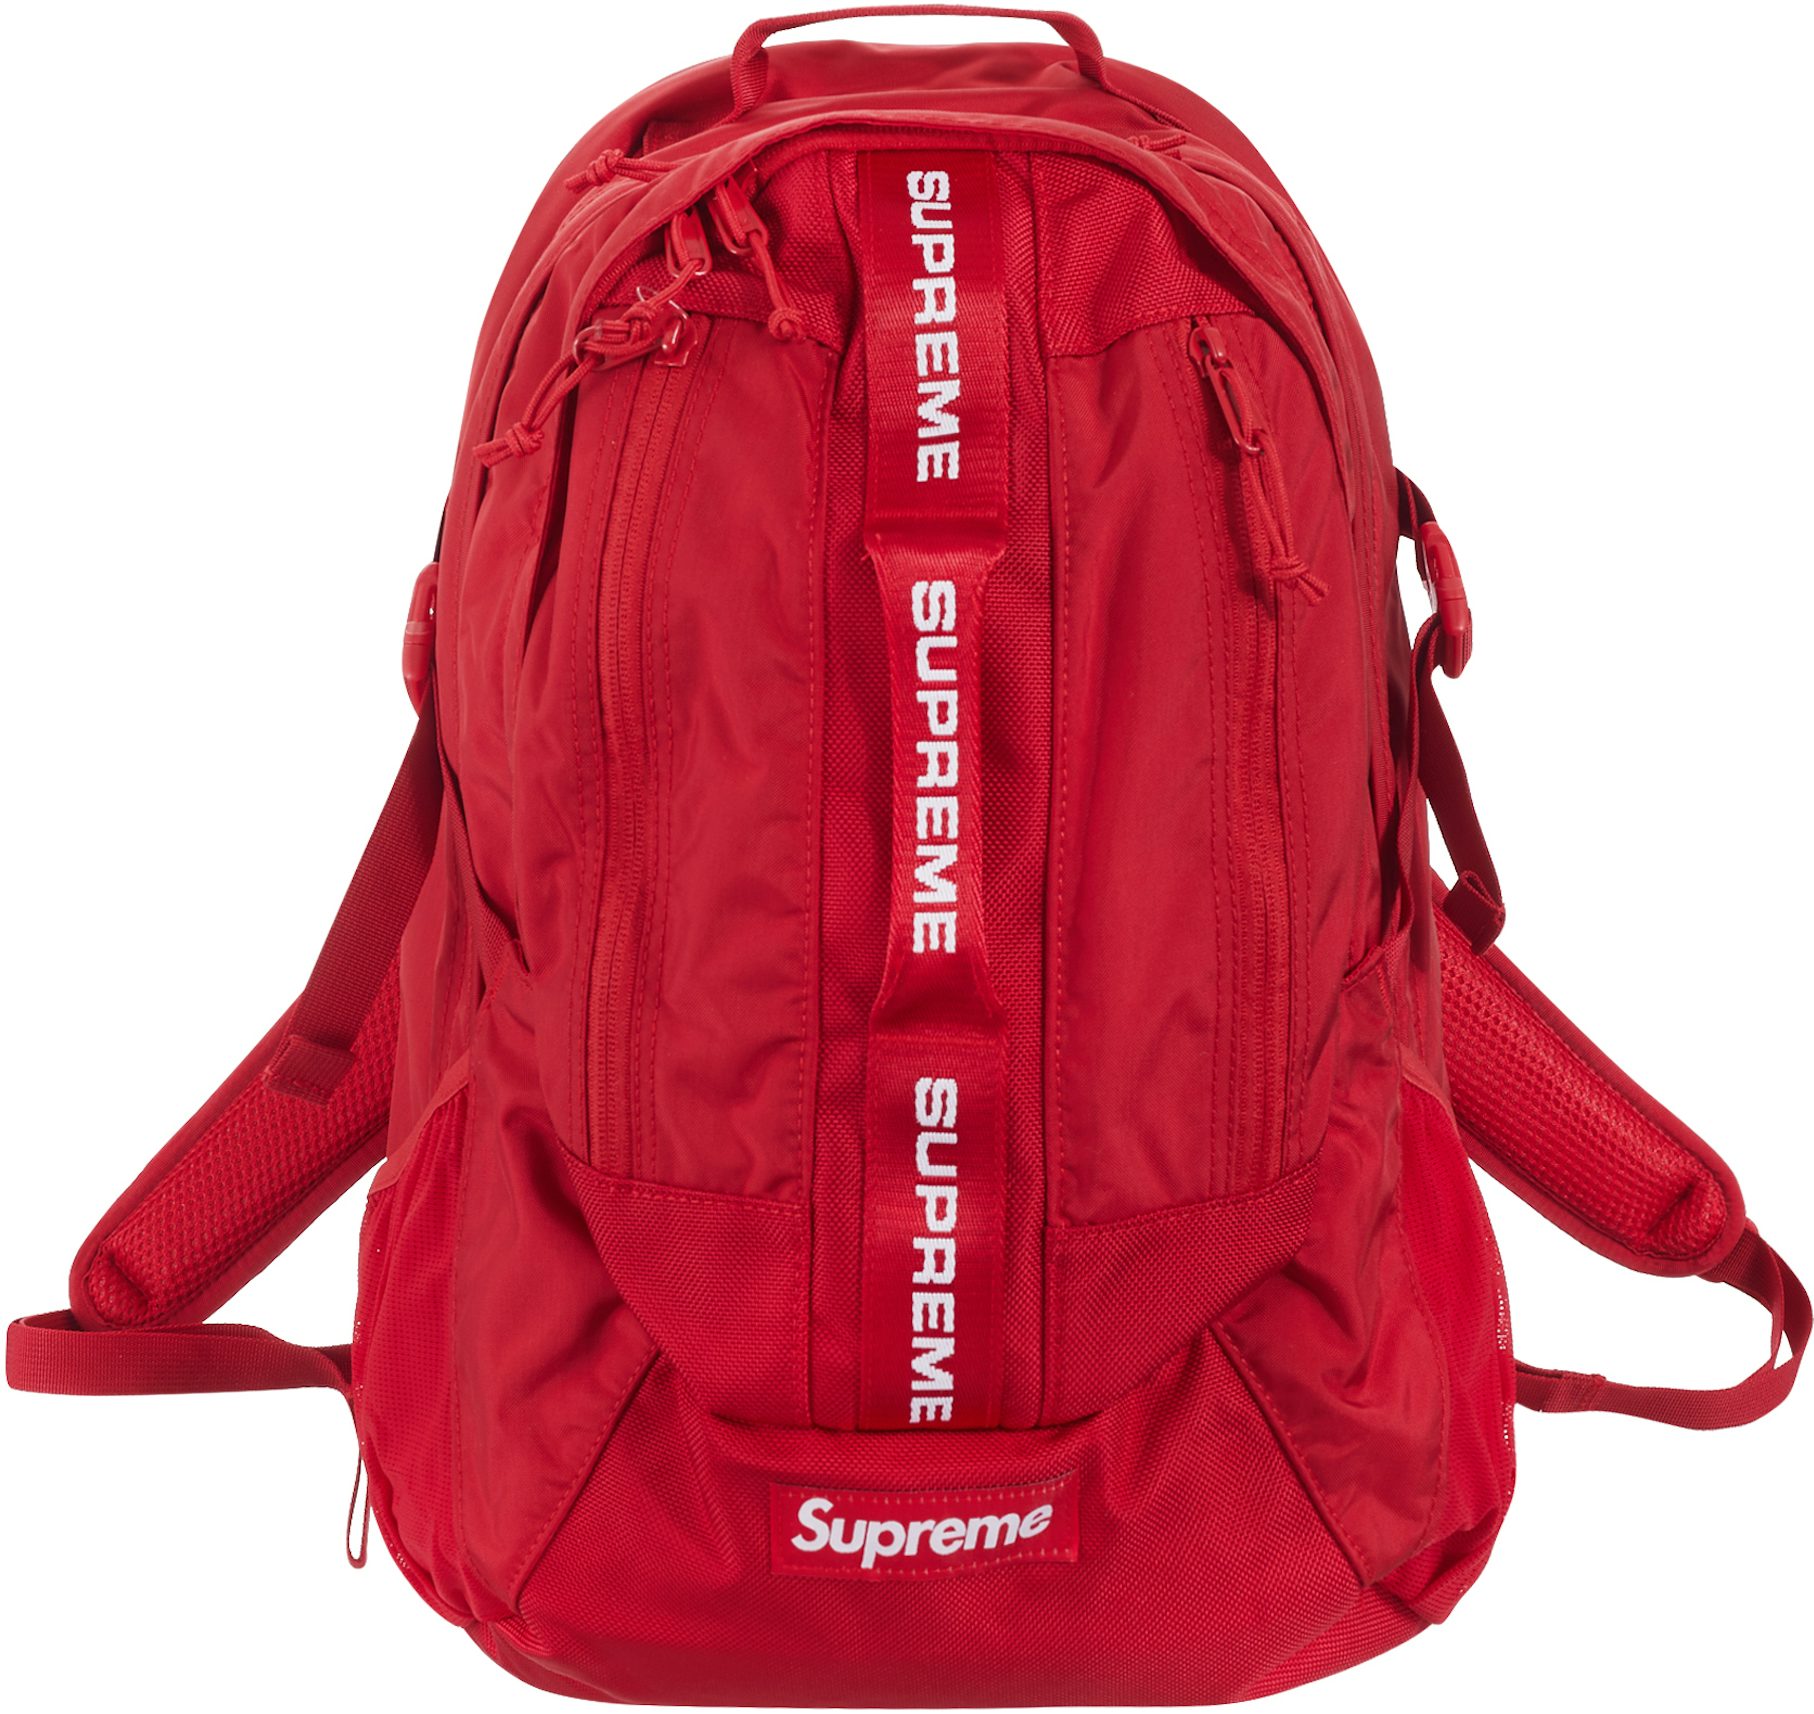 Every FW18 Supreme Bag Is Available on StockX 